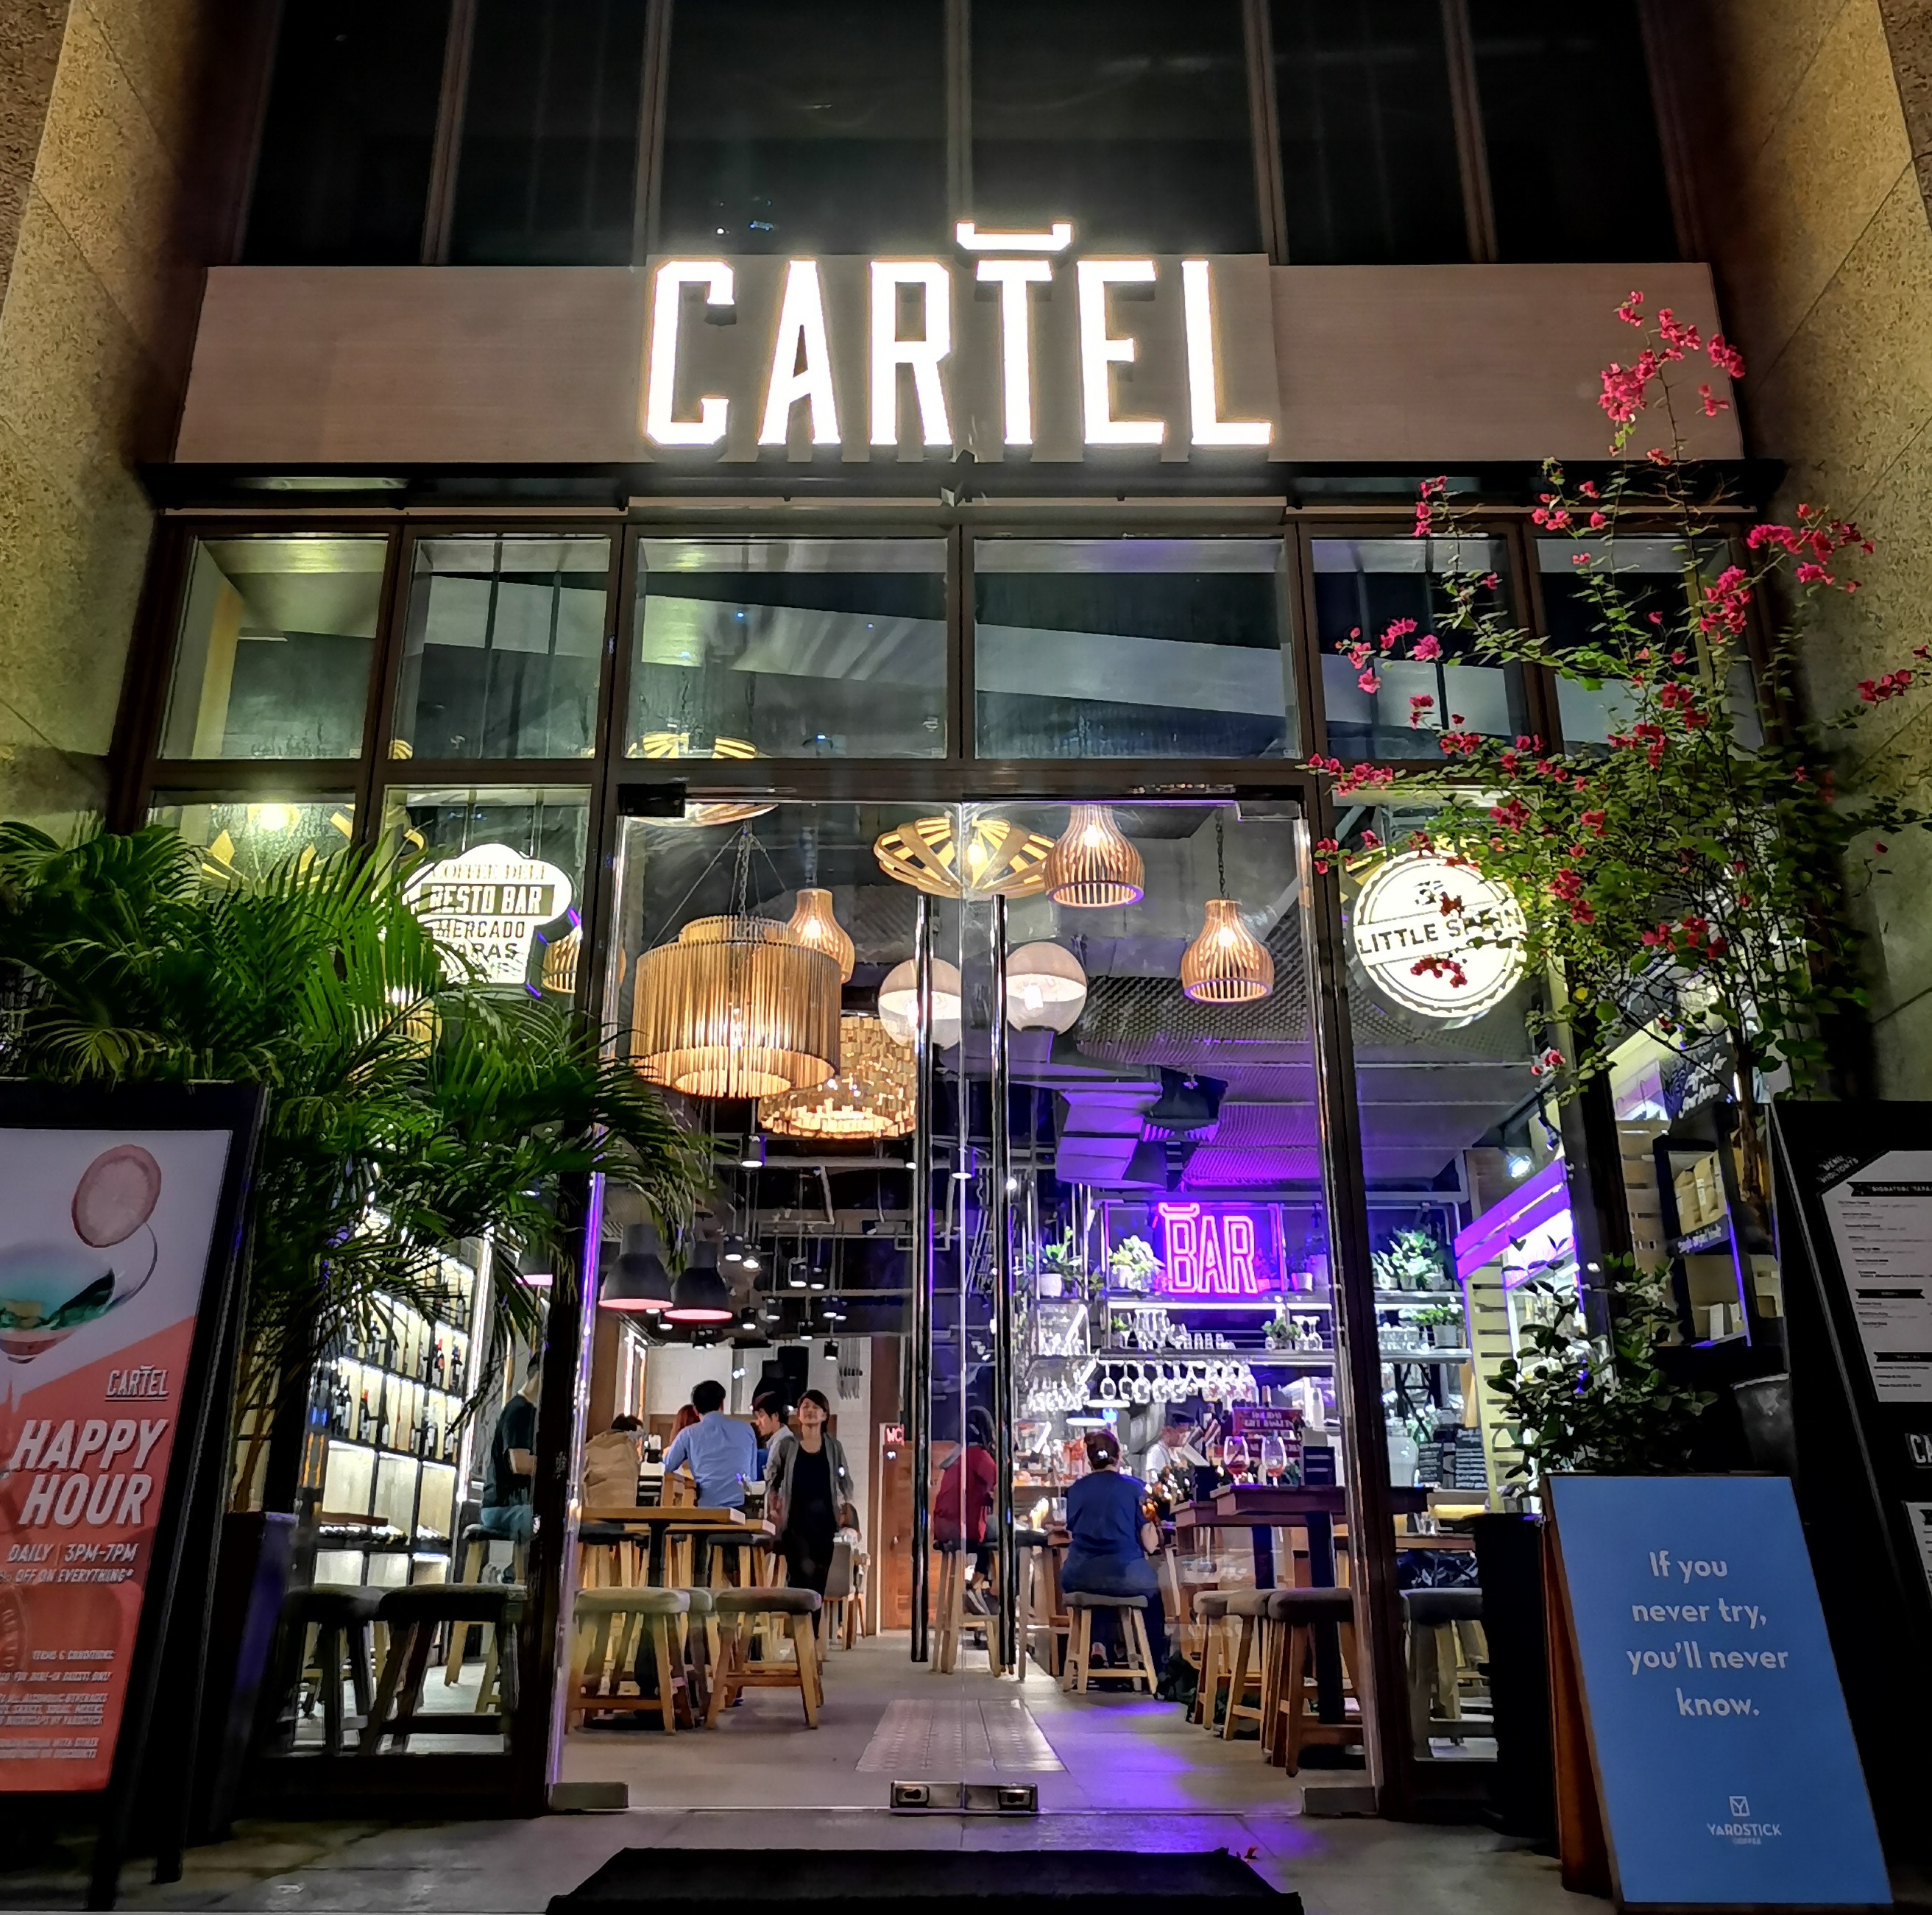 5df50a7af02ed 5df50a7af02efWant to experience a bit of Spain in the Philippines Then Go to Cartels Coffee Deli Bistro 9.jpg